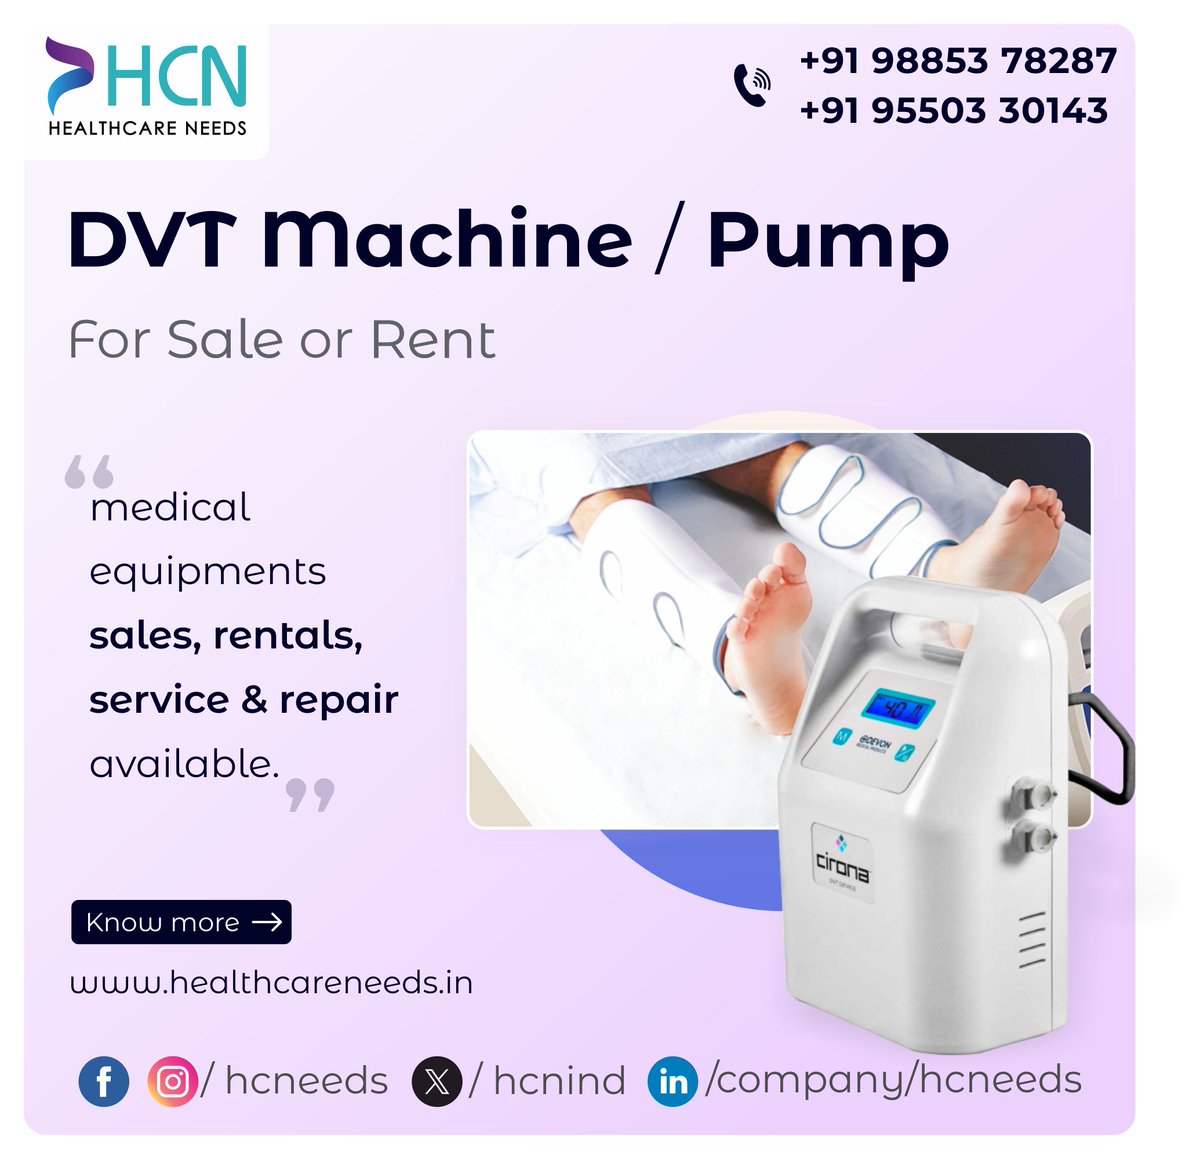 DVT Machine or DVT Pump for Sale or Rent.
Medical Equipment Sales, Rentals, Service and Repair available.

Healthcare Needs is one of the top dealers and service provider of DVT Machine in Hyderabad, Telangana and Andhra Pradesh. 

#dvtmachine #dvtpump #equipmentforsale